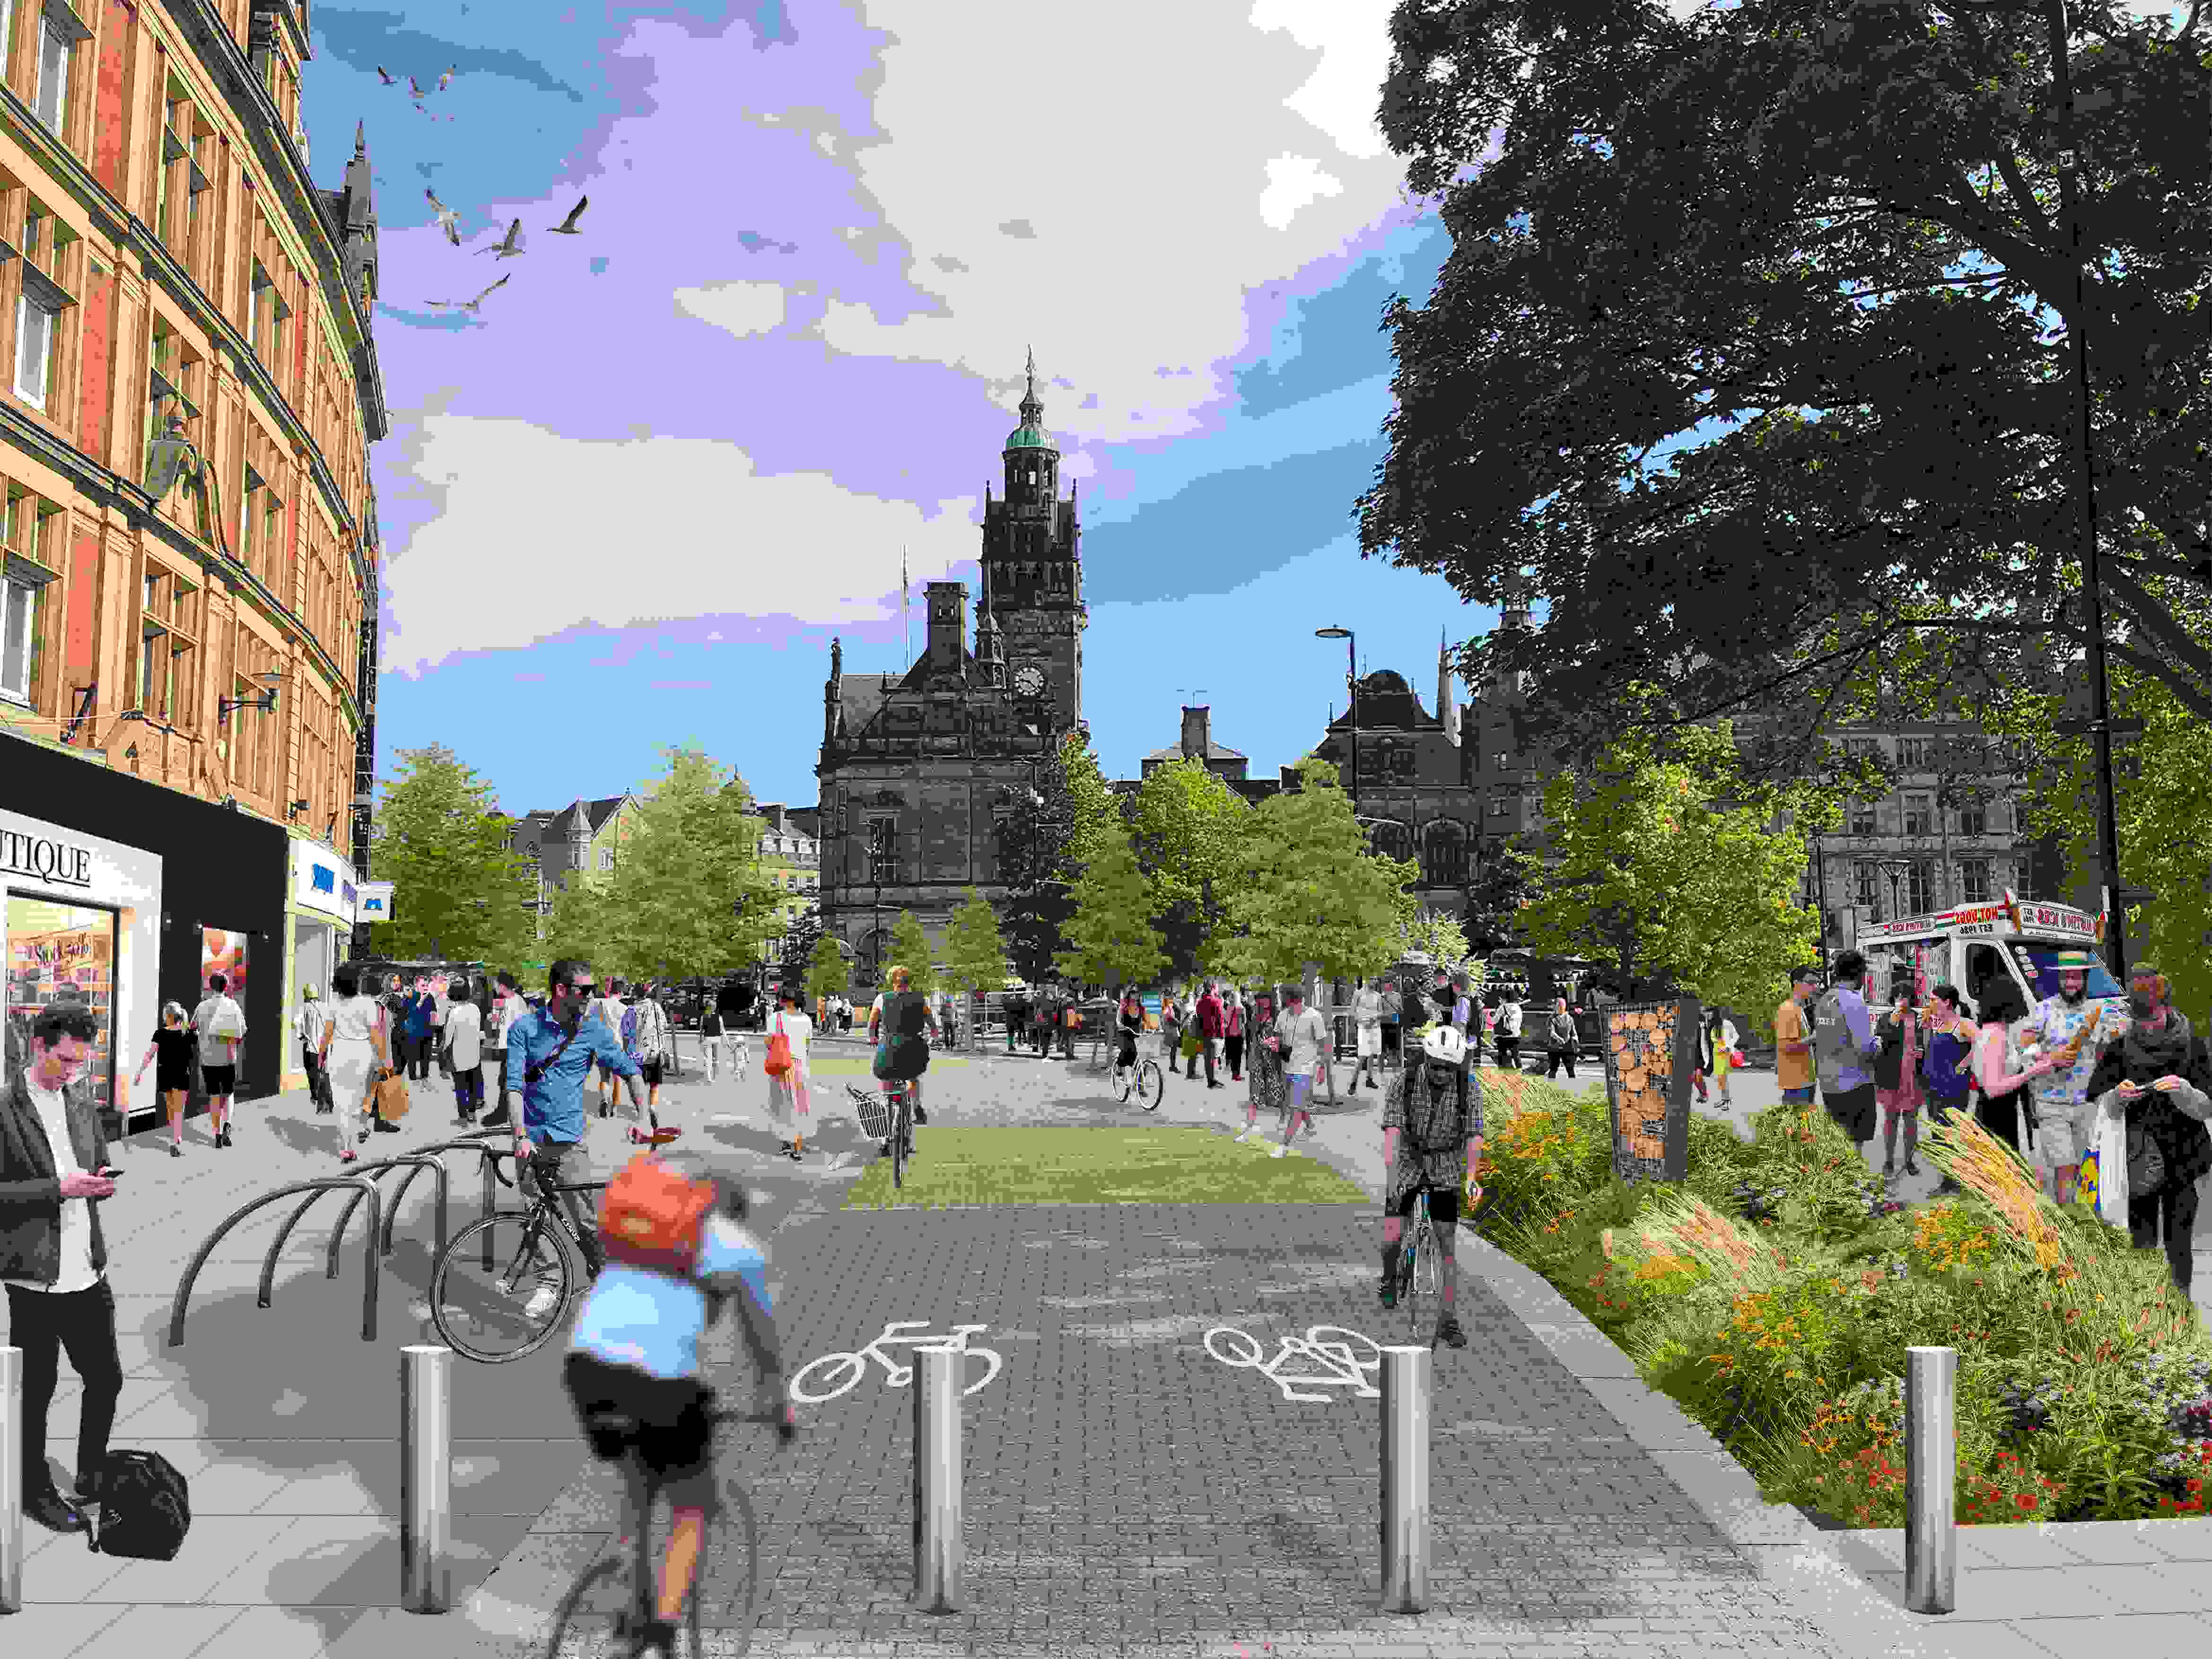 An artist impression of Pinstone Street in Sheffeild showing a row of bollards in the foreground and the road being used by cyclists and pedestrians, the road is flanked on both sides by buildings with Sheffield Town Hall in the background